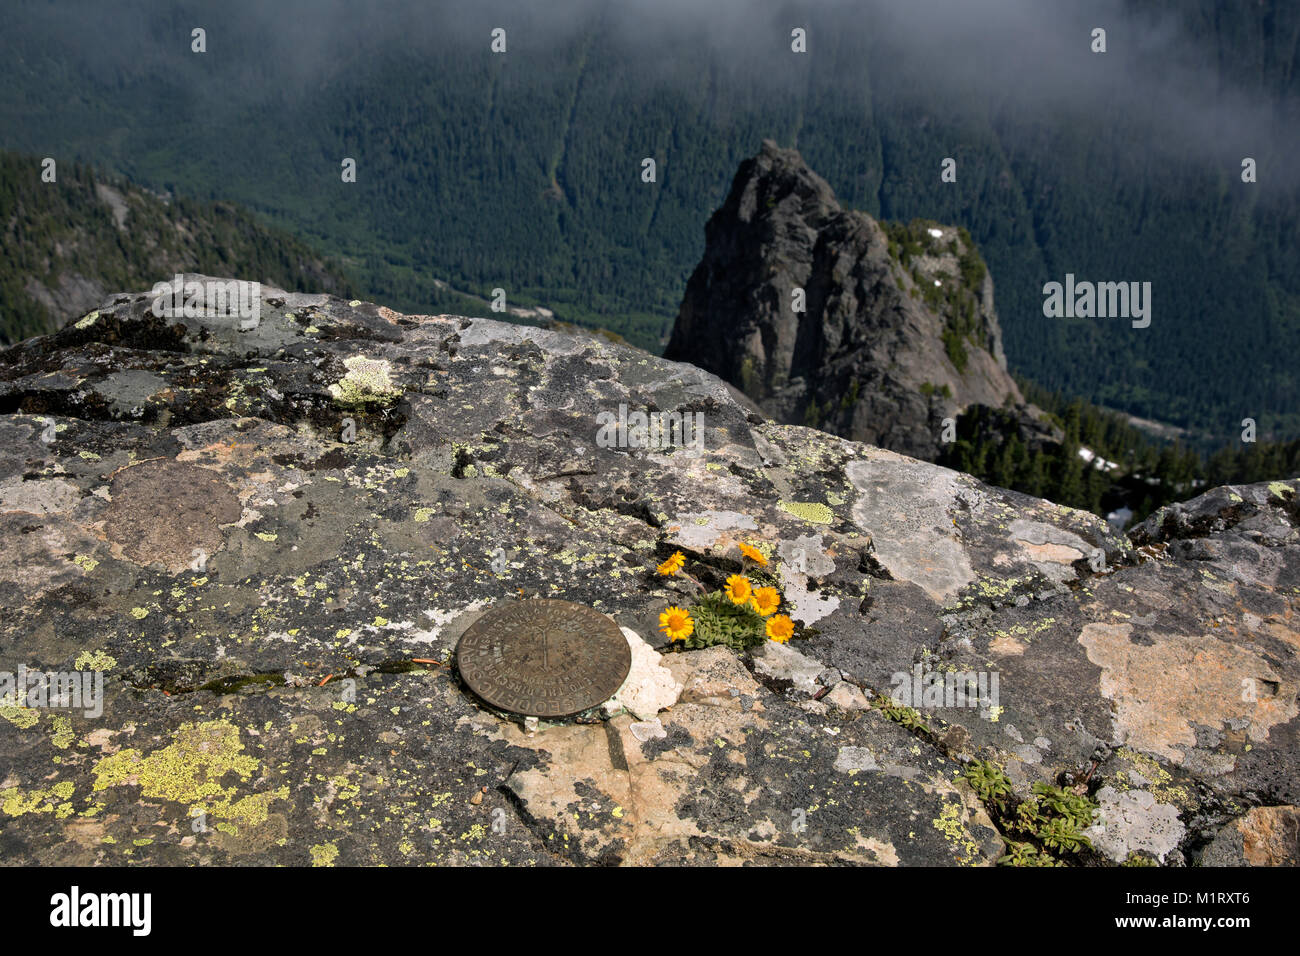 WA13201-00...WASHINGTON -  Geodetic Survey marker on the summit of Snoqualmie Mountain, overlooking over the Middle Fork Snoqualmie River Valley. Stock Photo